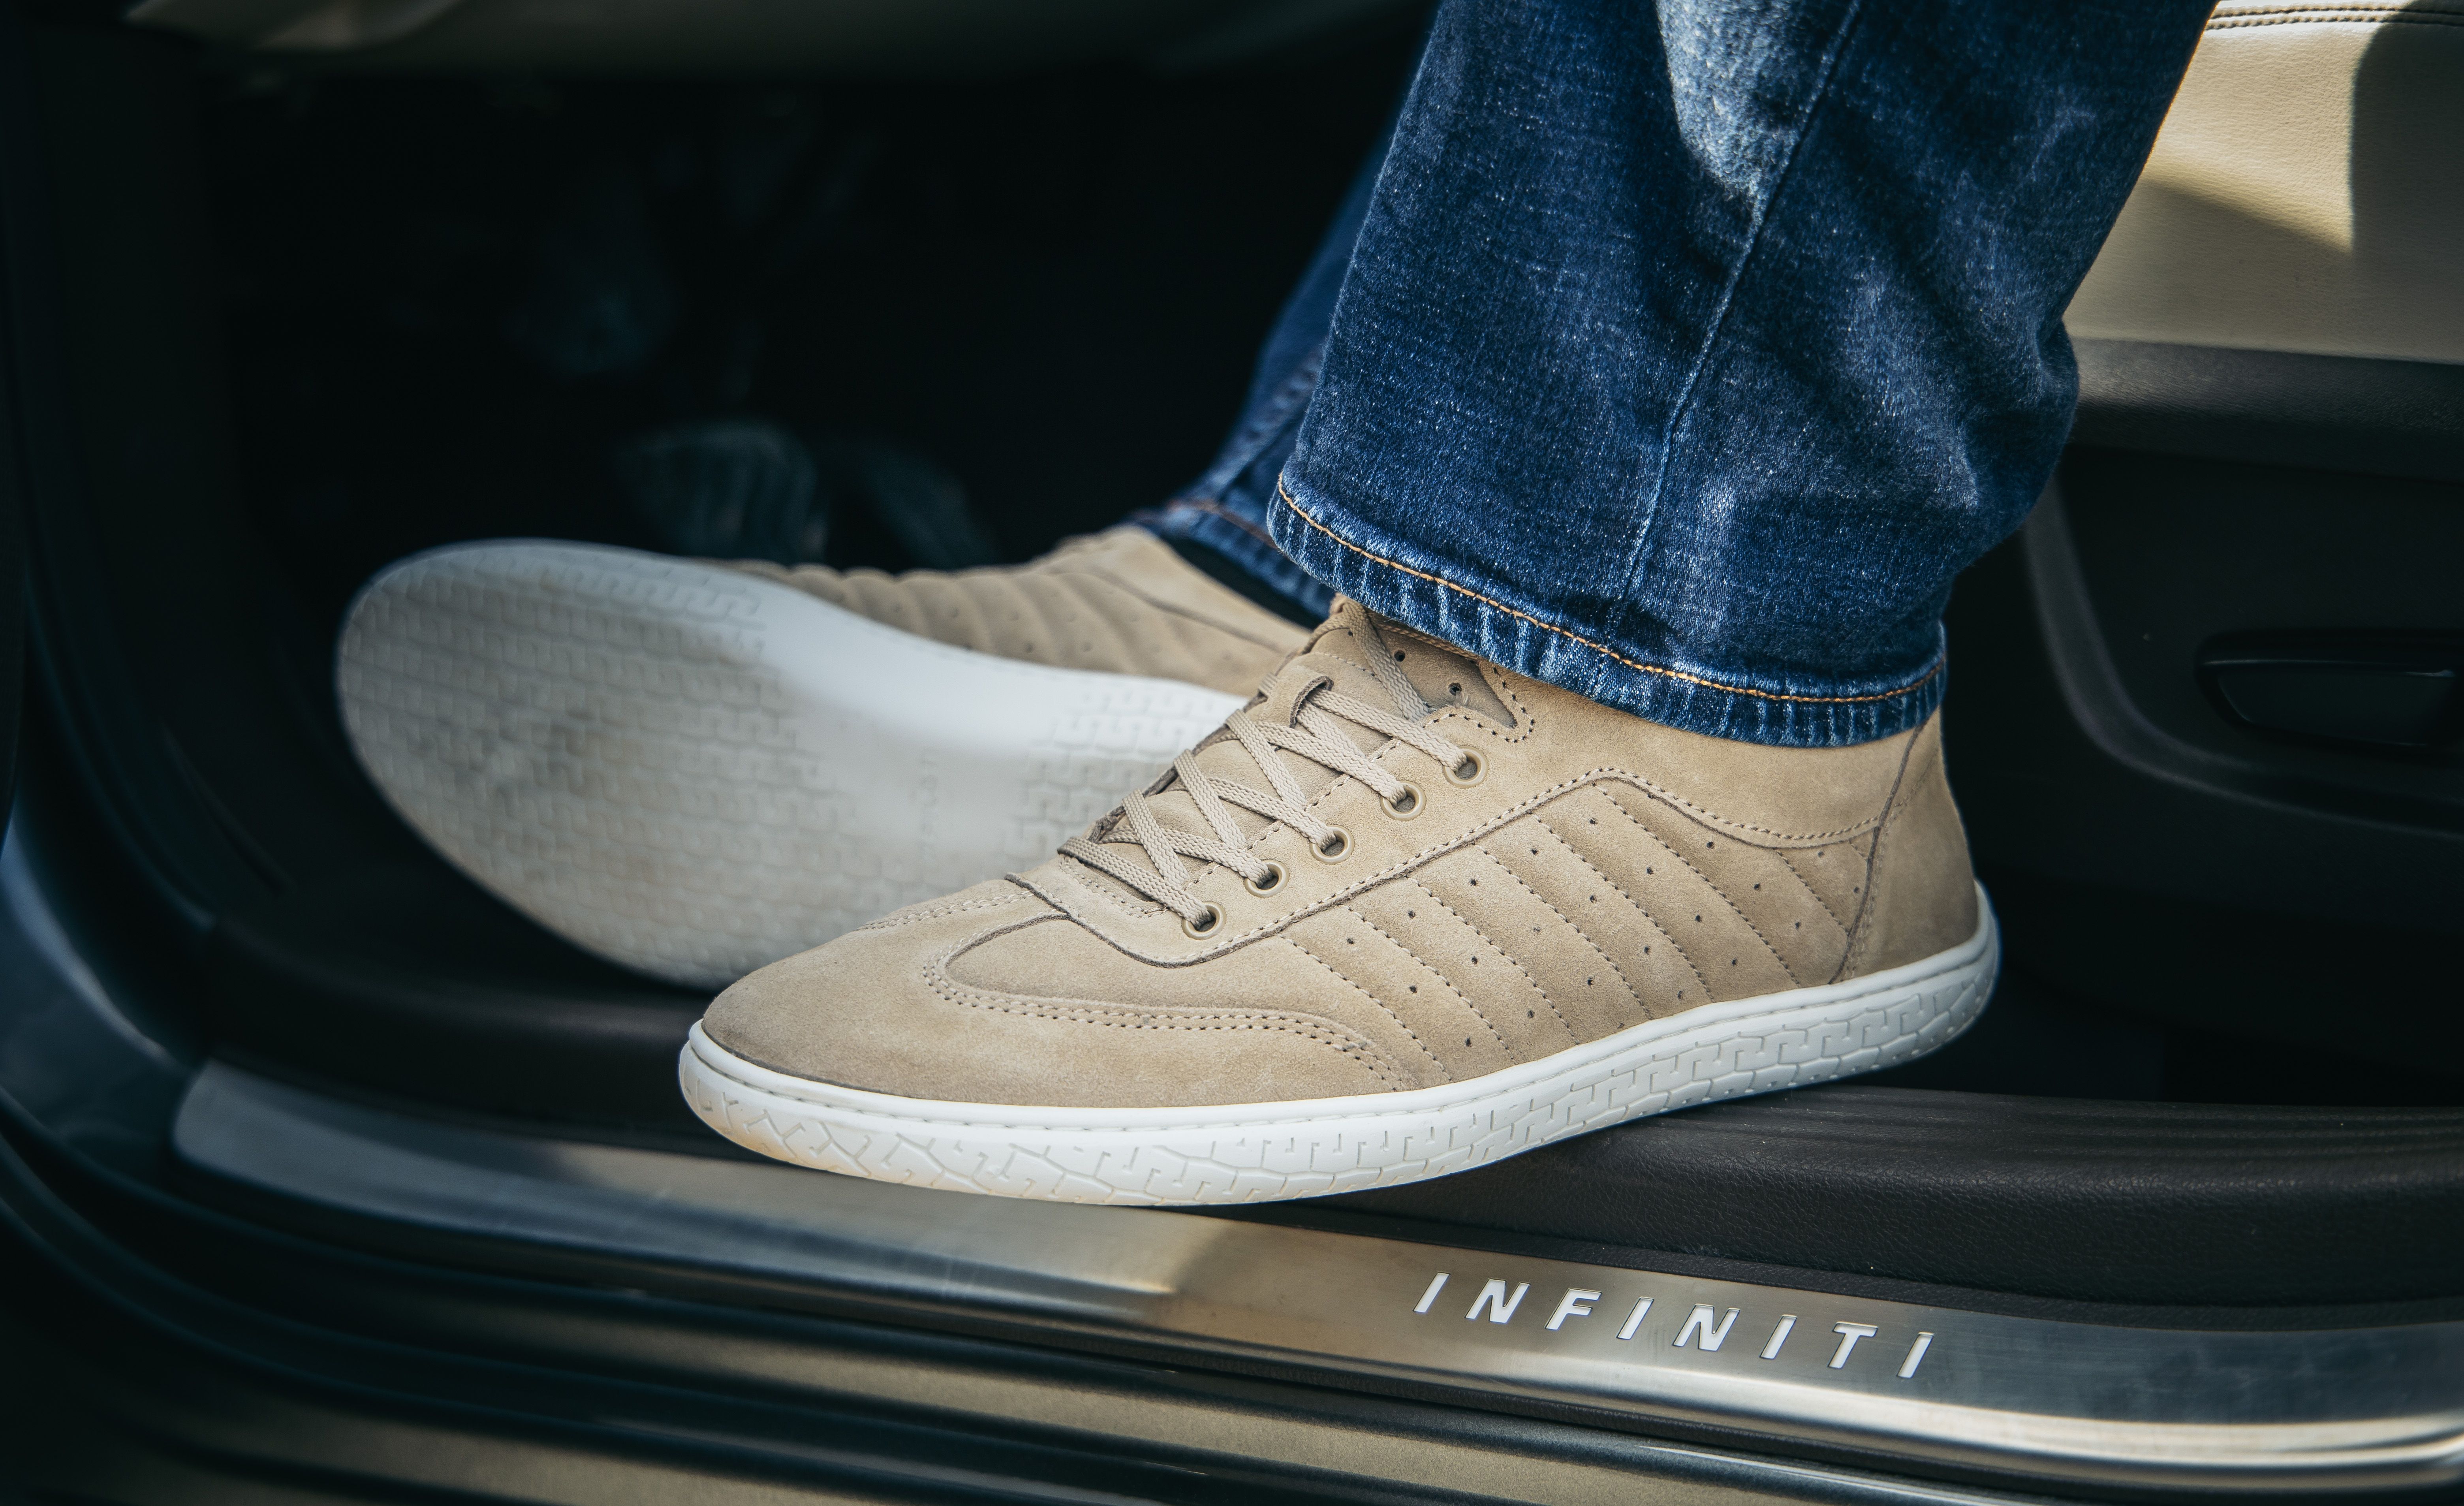 thin sole shoes for driving